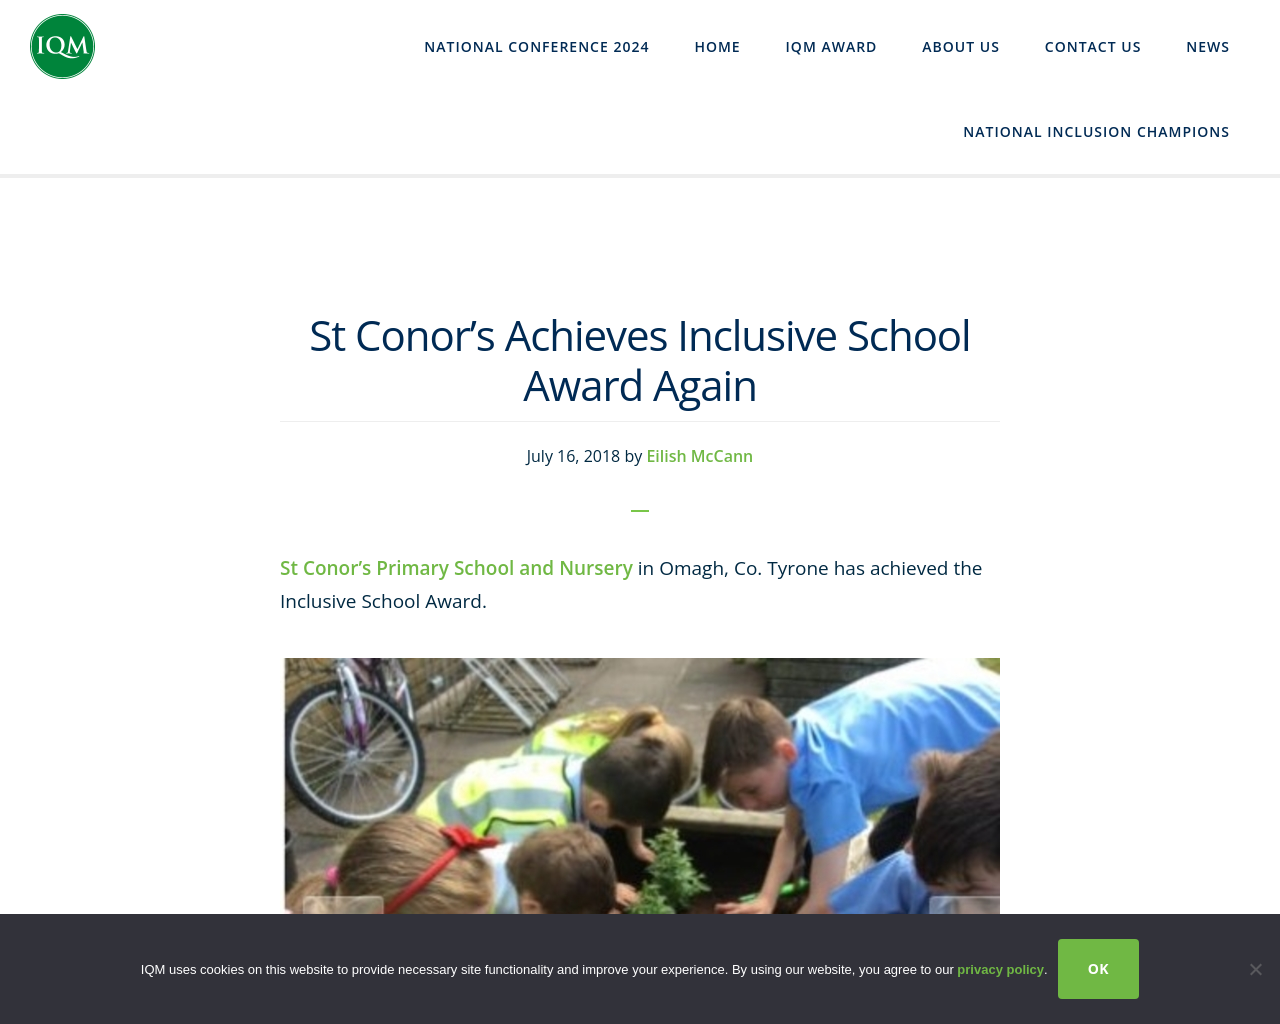 St Conor's Primary School and Nursery in Omagh, Co. Tyrone has achieved the Inclusive School Award.